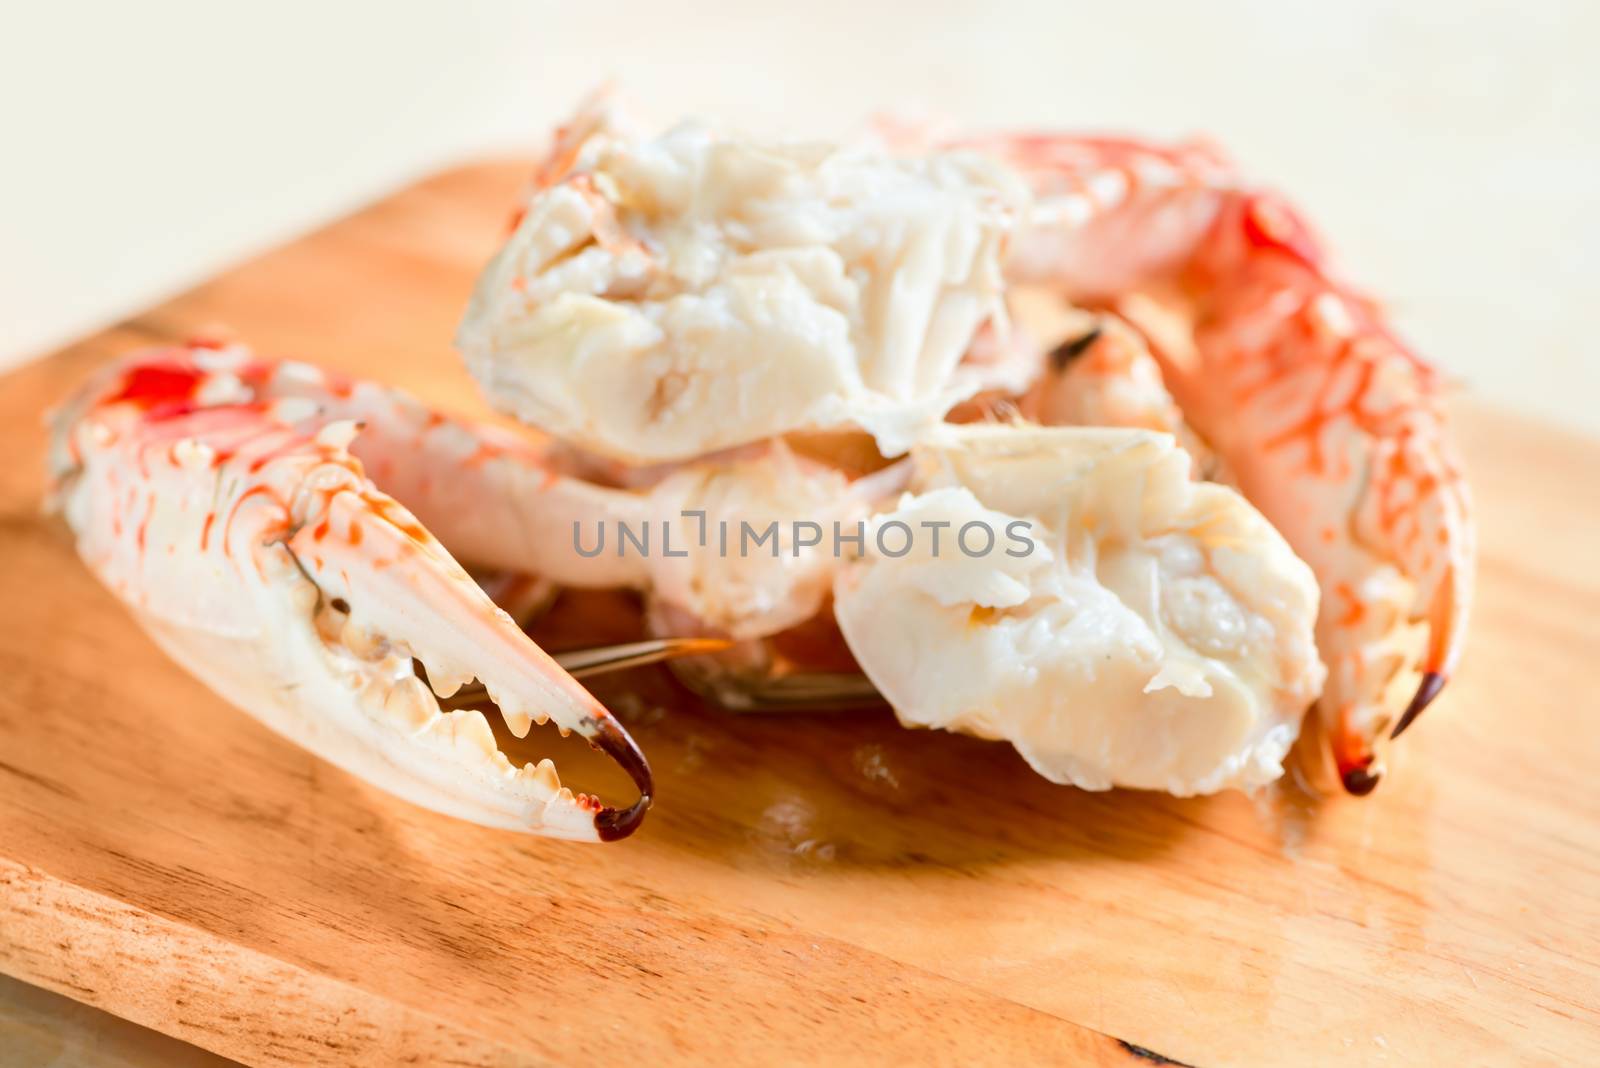  Fresh boiled and dressed crabs on wooden board